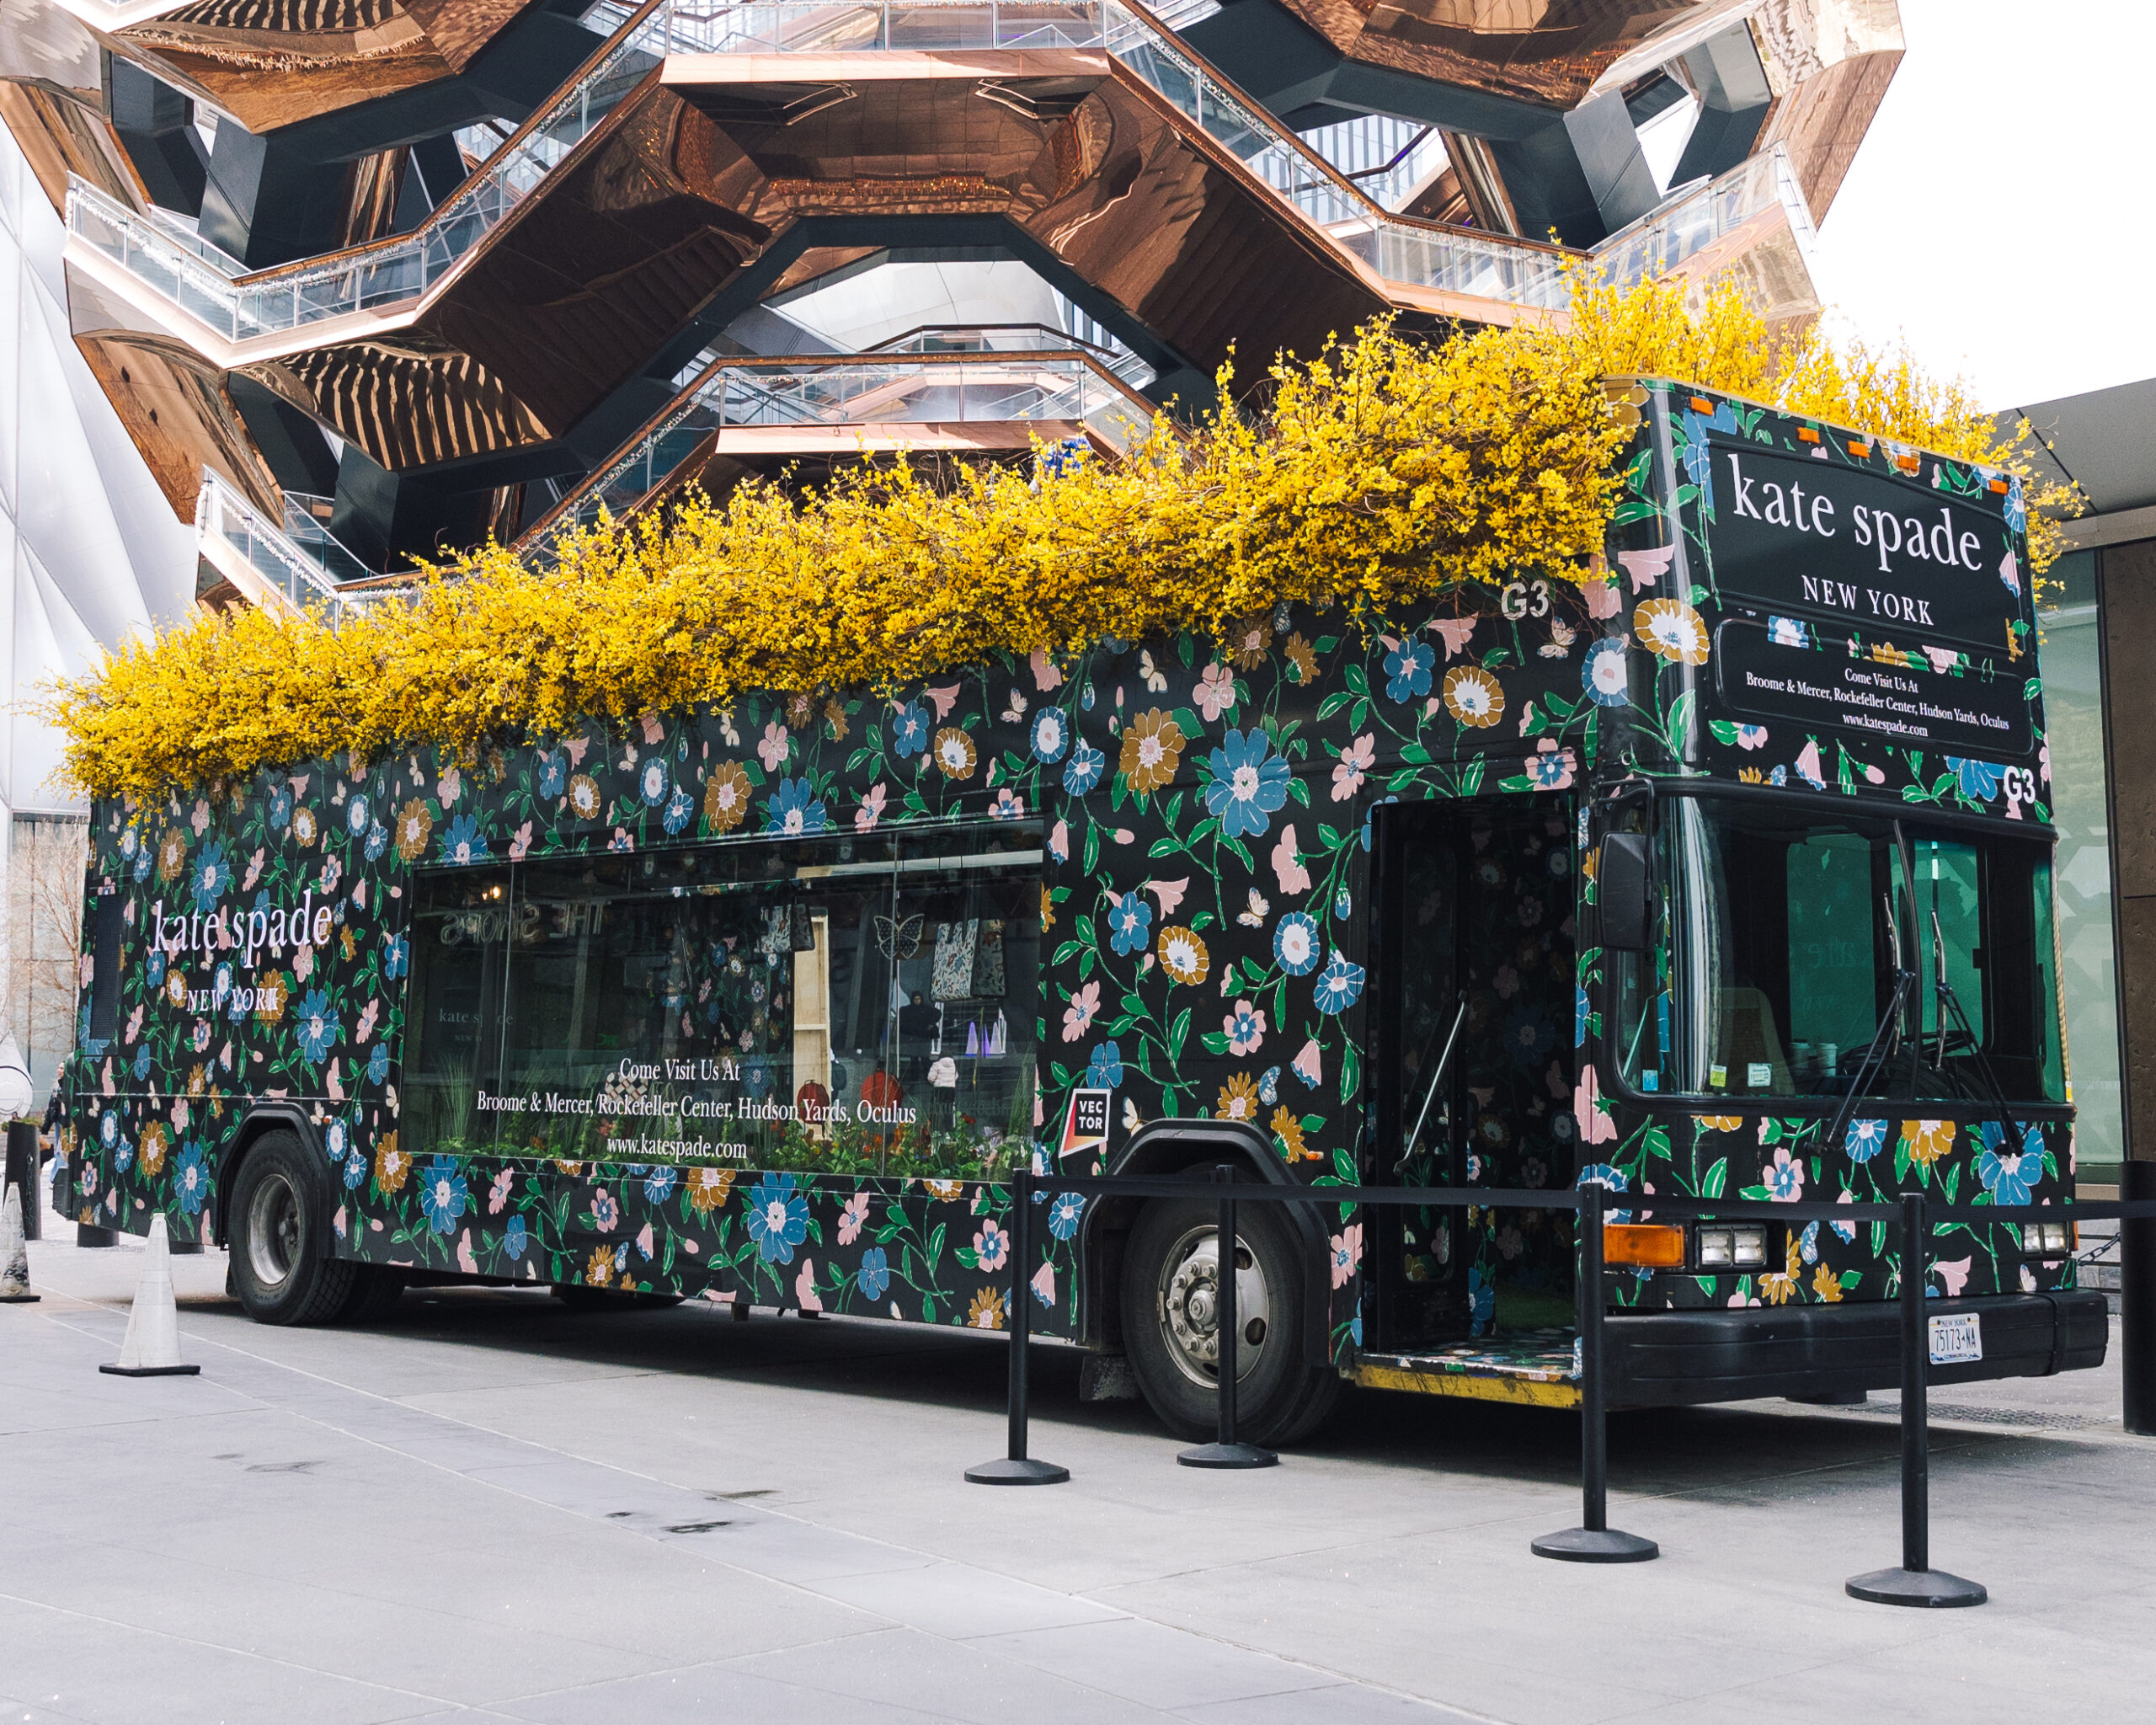 https://nycplugged.com/wp-content/uploads/2023/04/kate-spade-bus-scaled.jpg